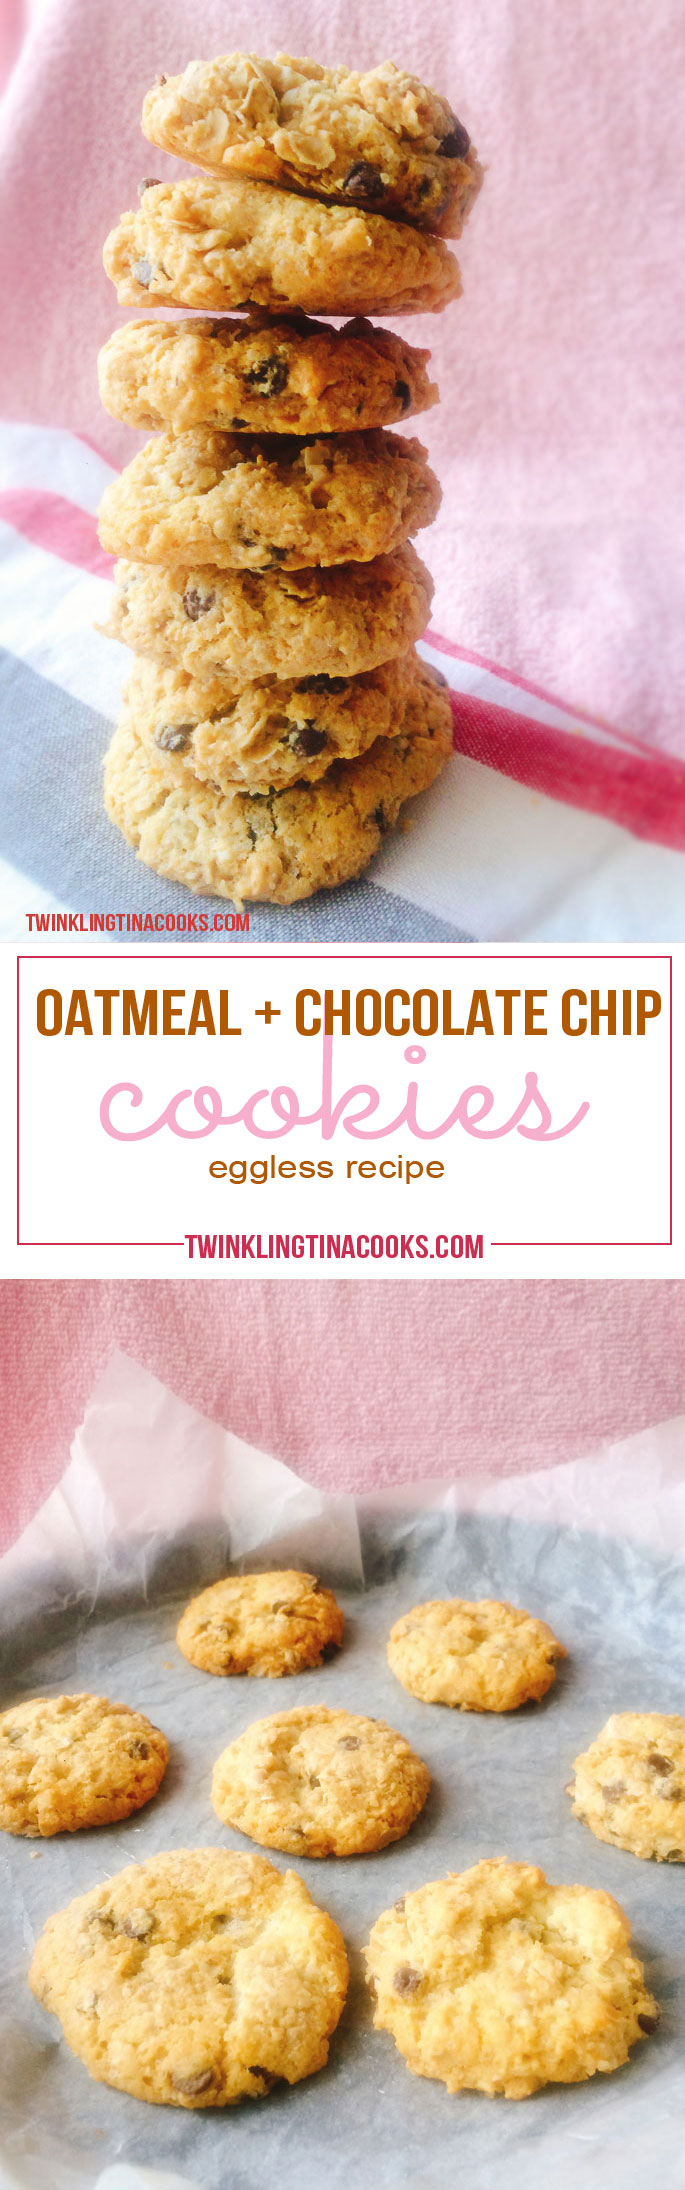 oats-chocolate-chip-cookies-recipe-pin